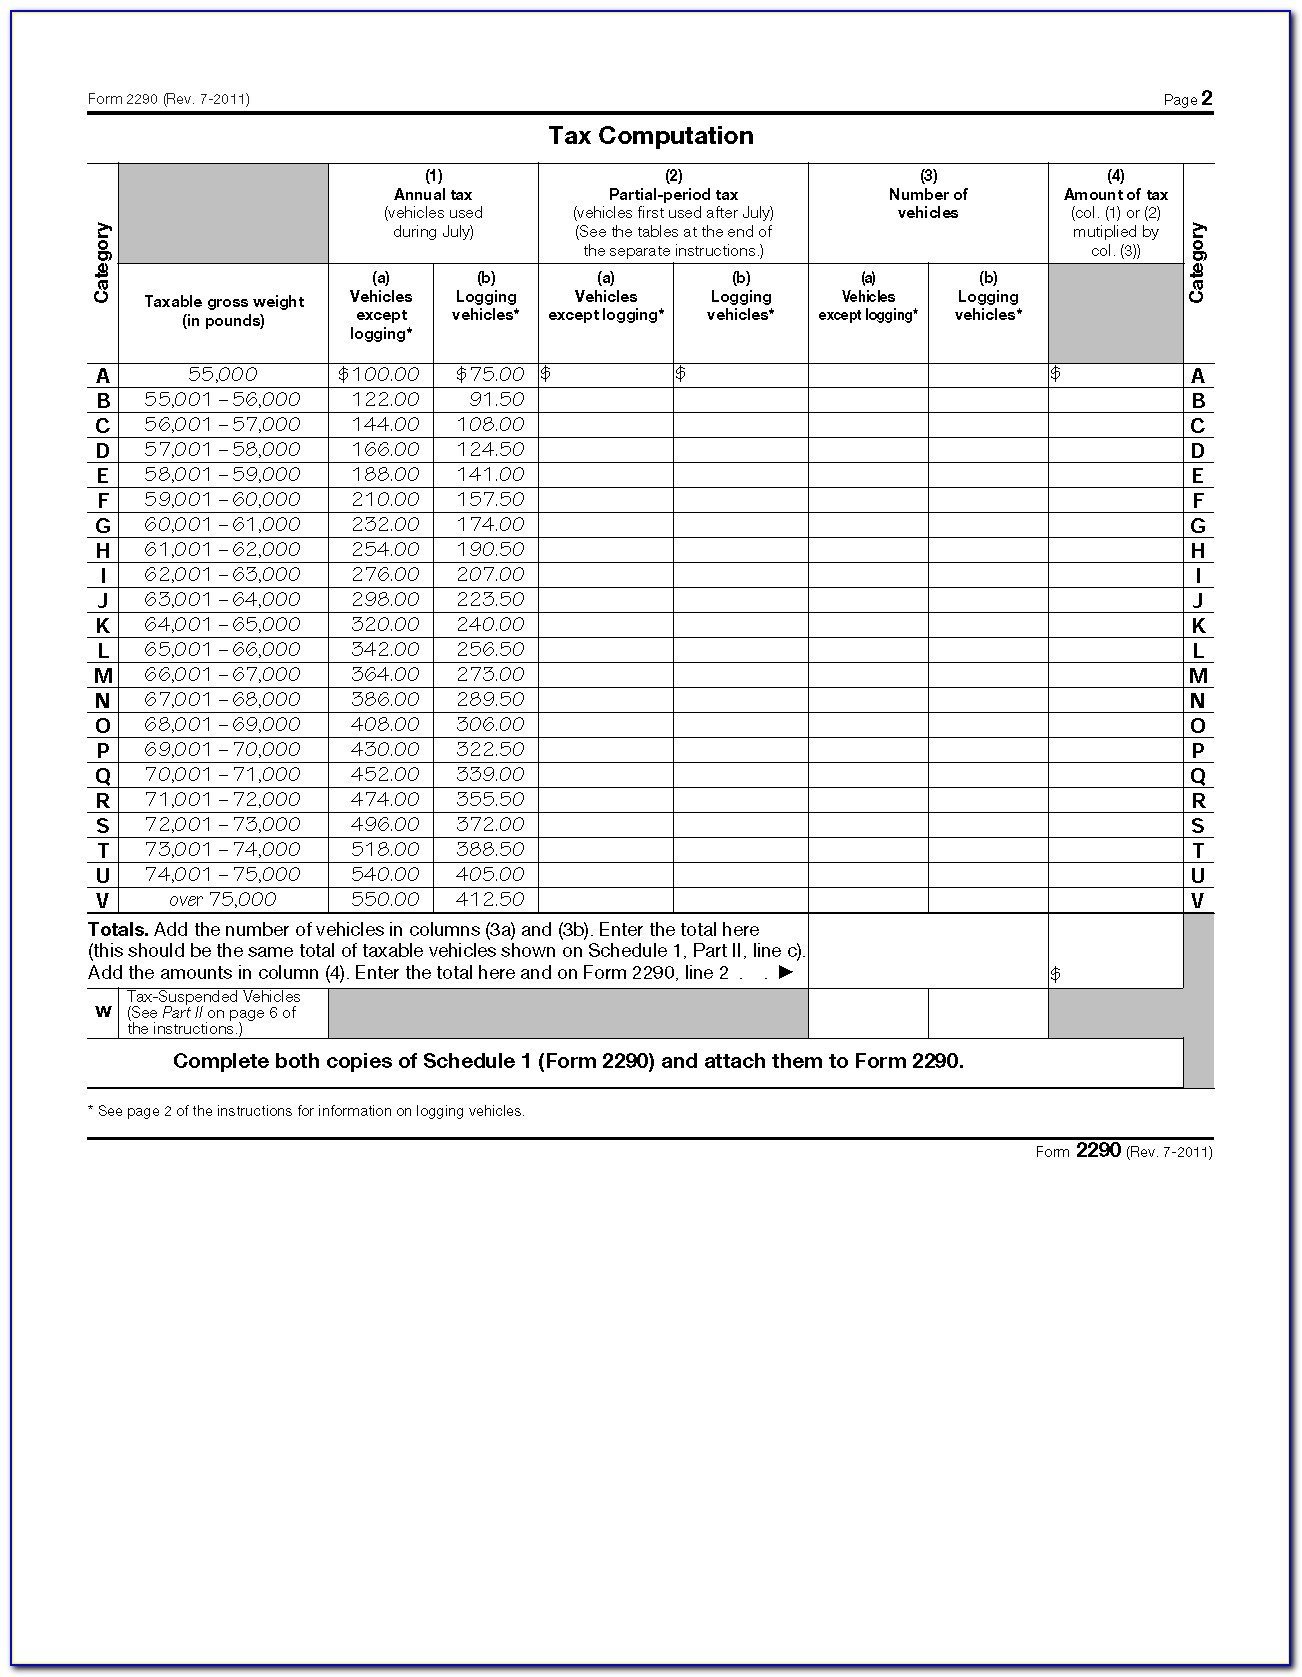 Heavy Vehicle Use Tax Form 2290 Schedule 1